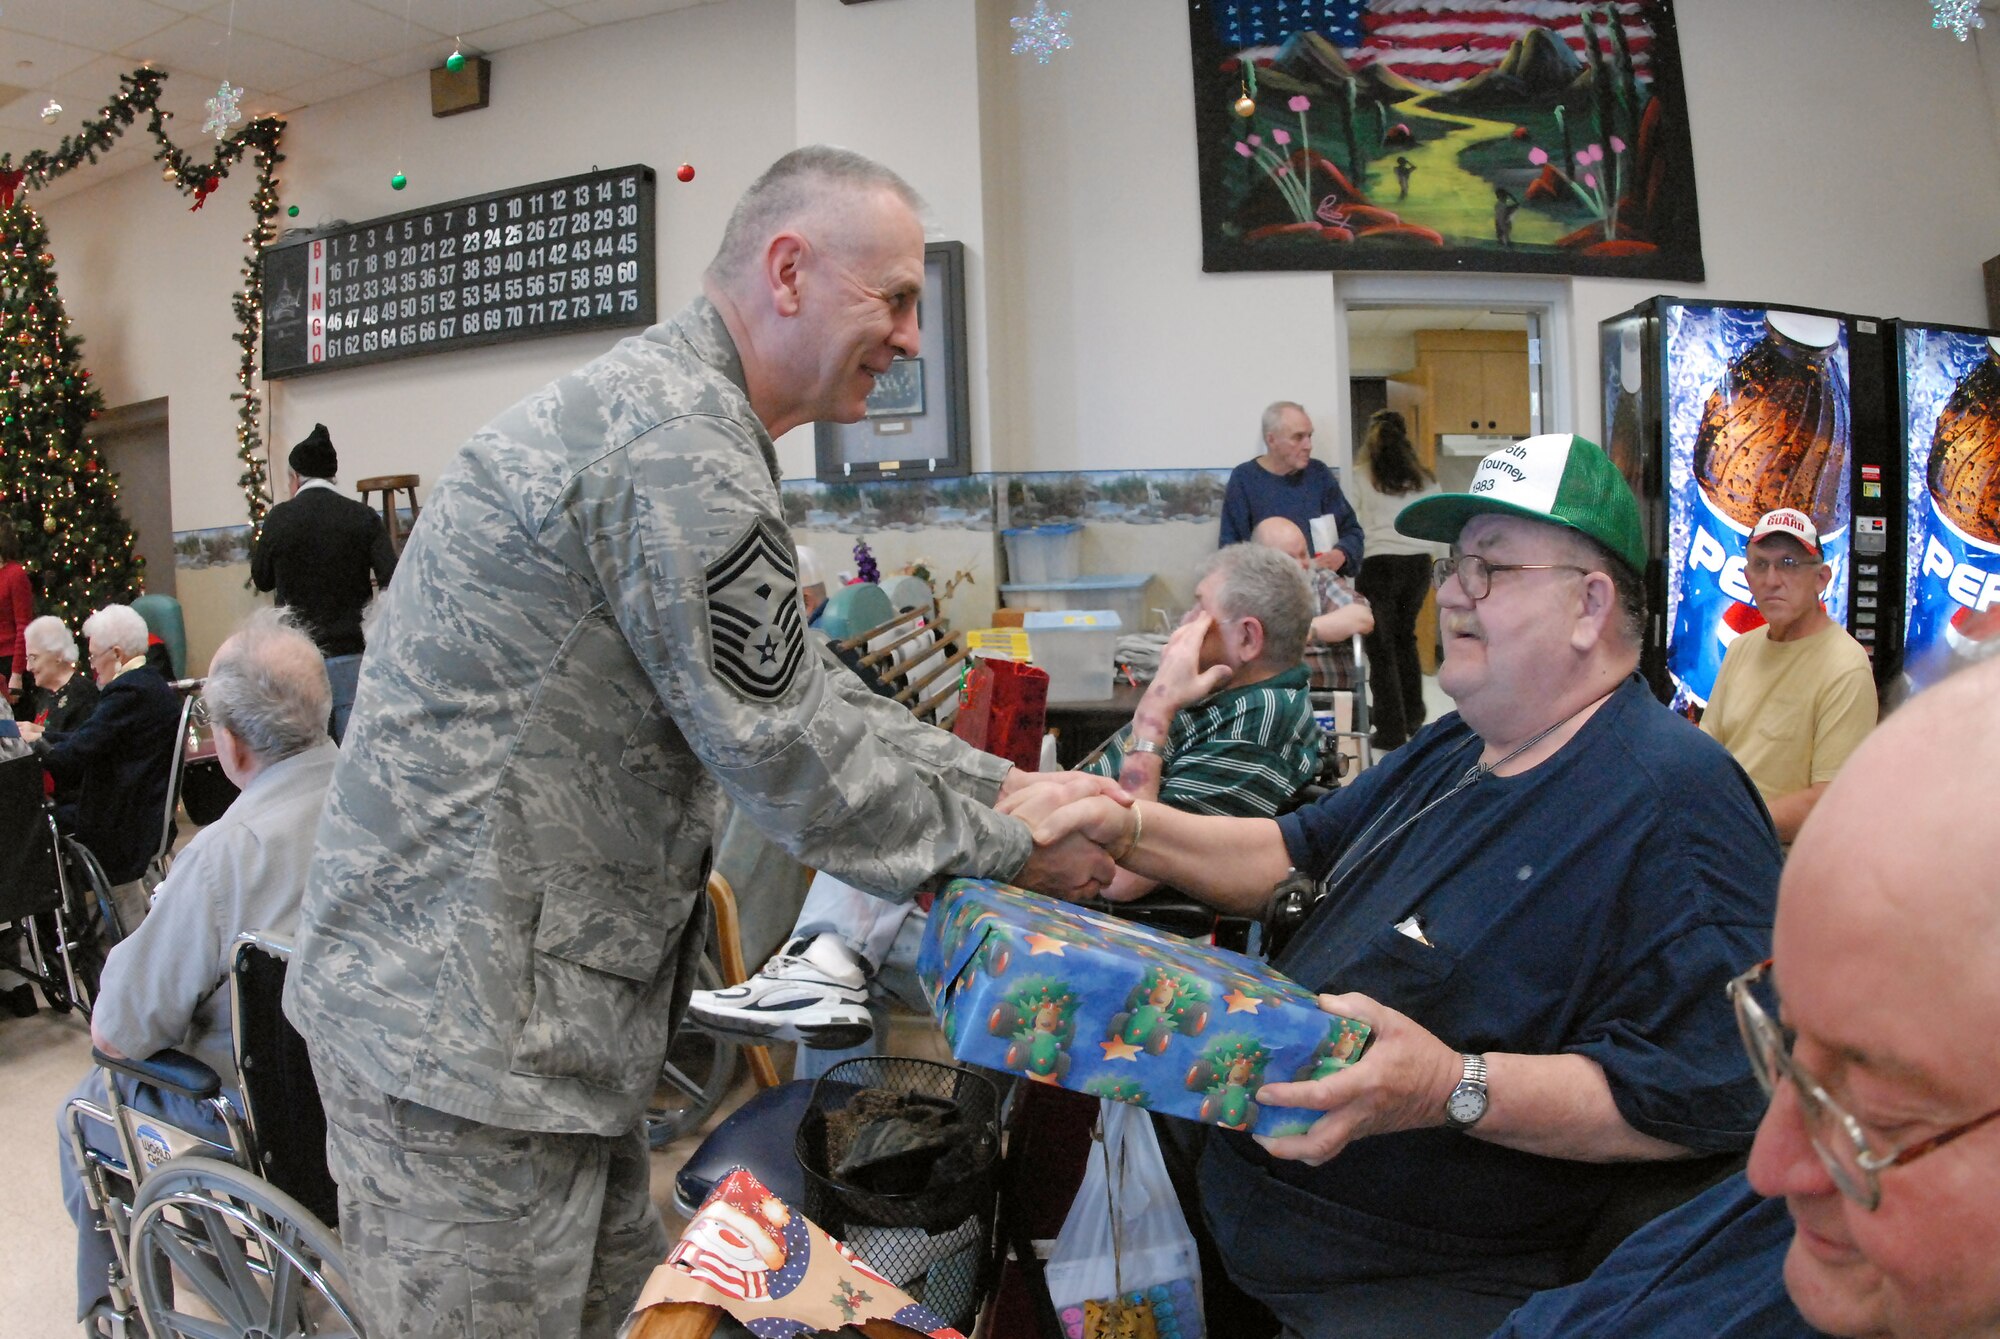 Senior Master Sgt. Paul Tangen gives a Christmas gift to Army Vietnam War veteran Roger Severson at the North Dakota Veteran's Nursing Home Dec. 10 in Lisbon, N.D. The gifts are given to veterans at the nursing home by the North Dakota Air and Army National Guard each December using funds raised through personal donations given by the North Dakota National Guard members. Sergeant Tangen is the the 119th Wing first sergeant. (U.S. Air Force photo/Senior Master Sgt. David H. Lipp) 